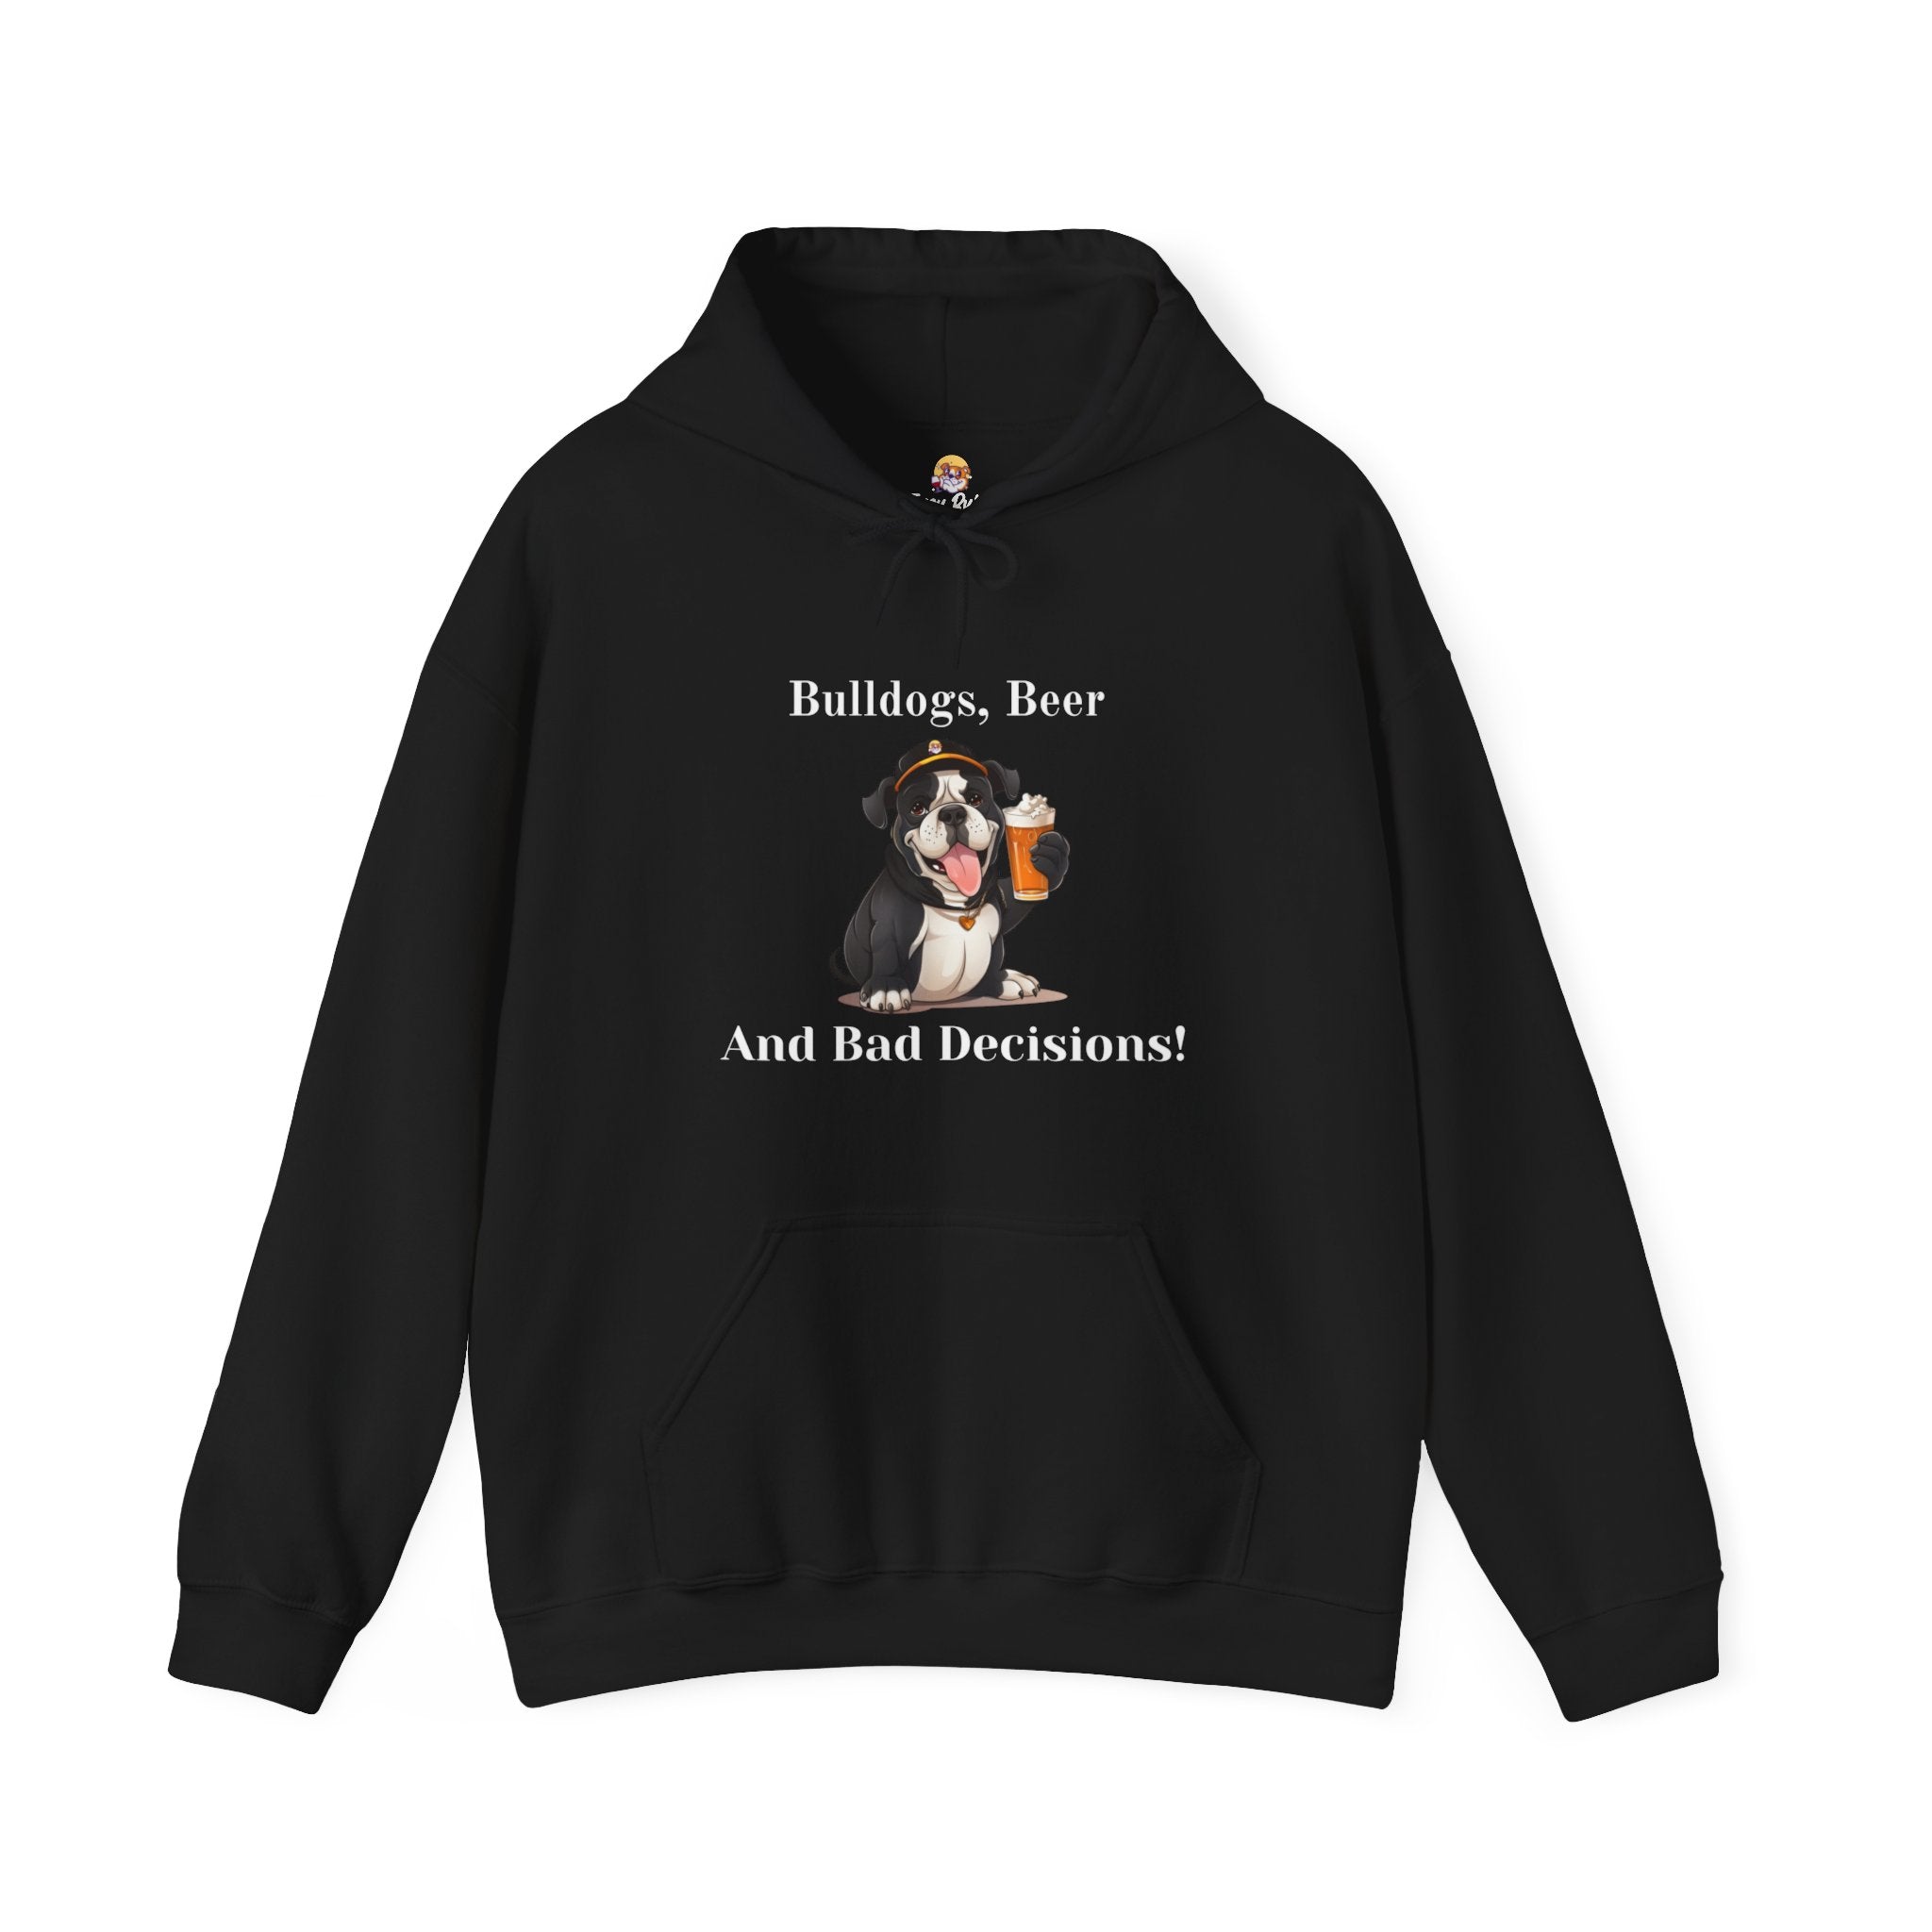 Bulldogs, Beer, and Bad Decisions" Hoodie - Your Go-To Gear for Mischievous Times! (English/Black)